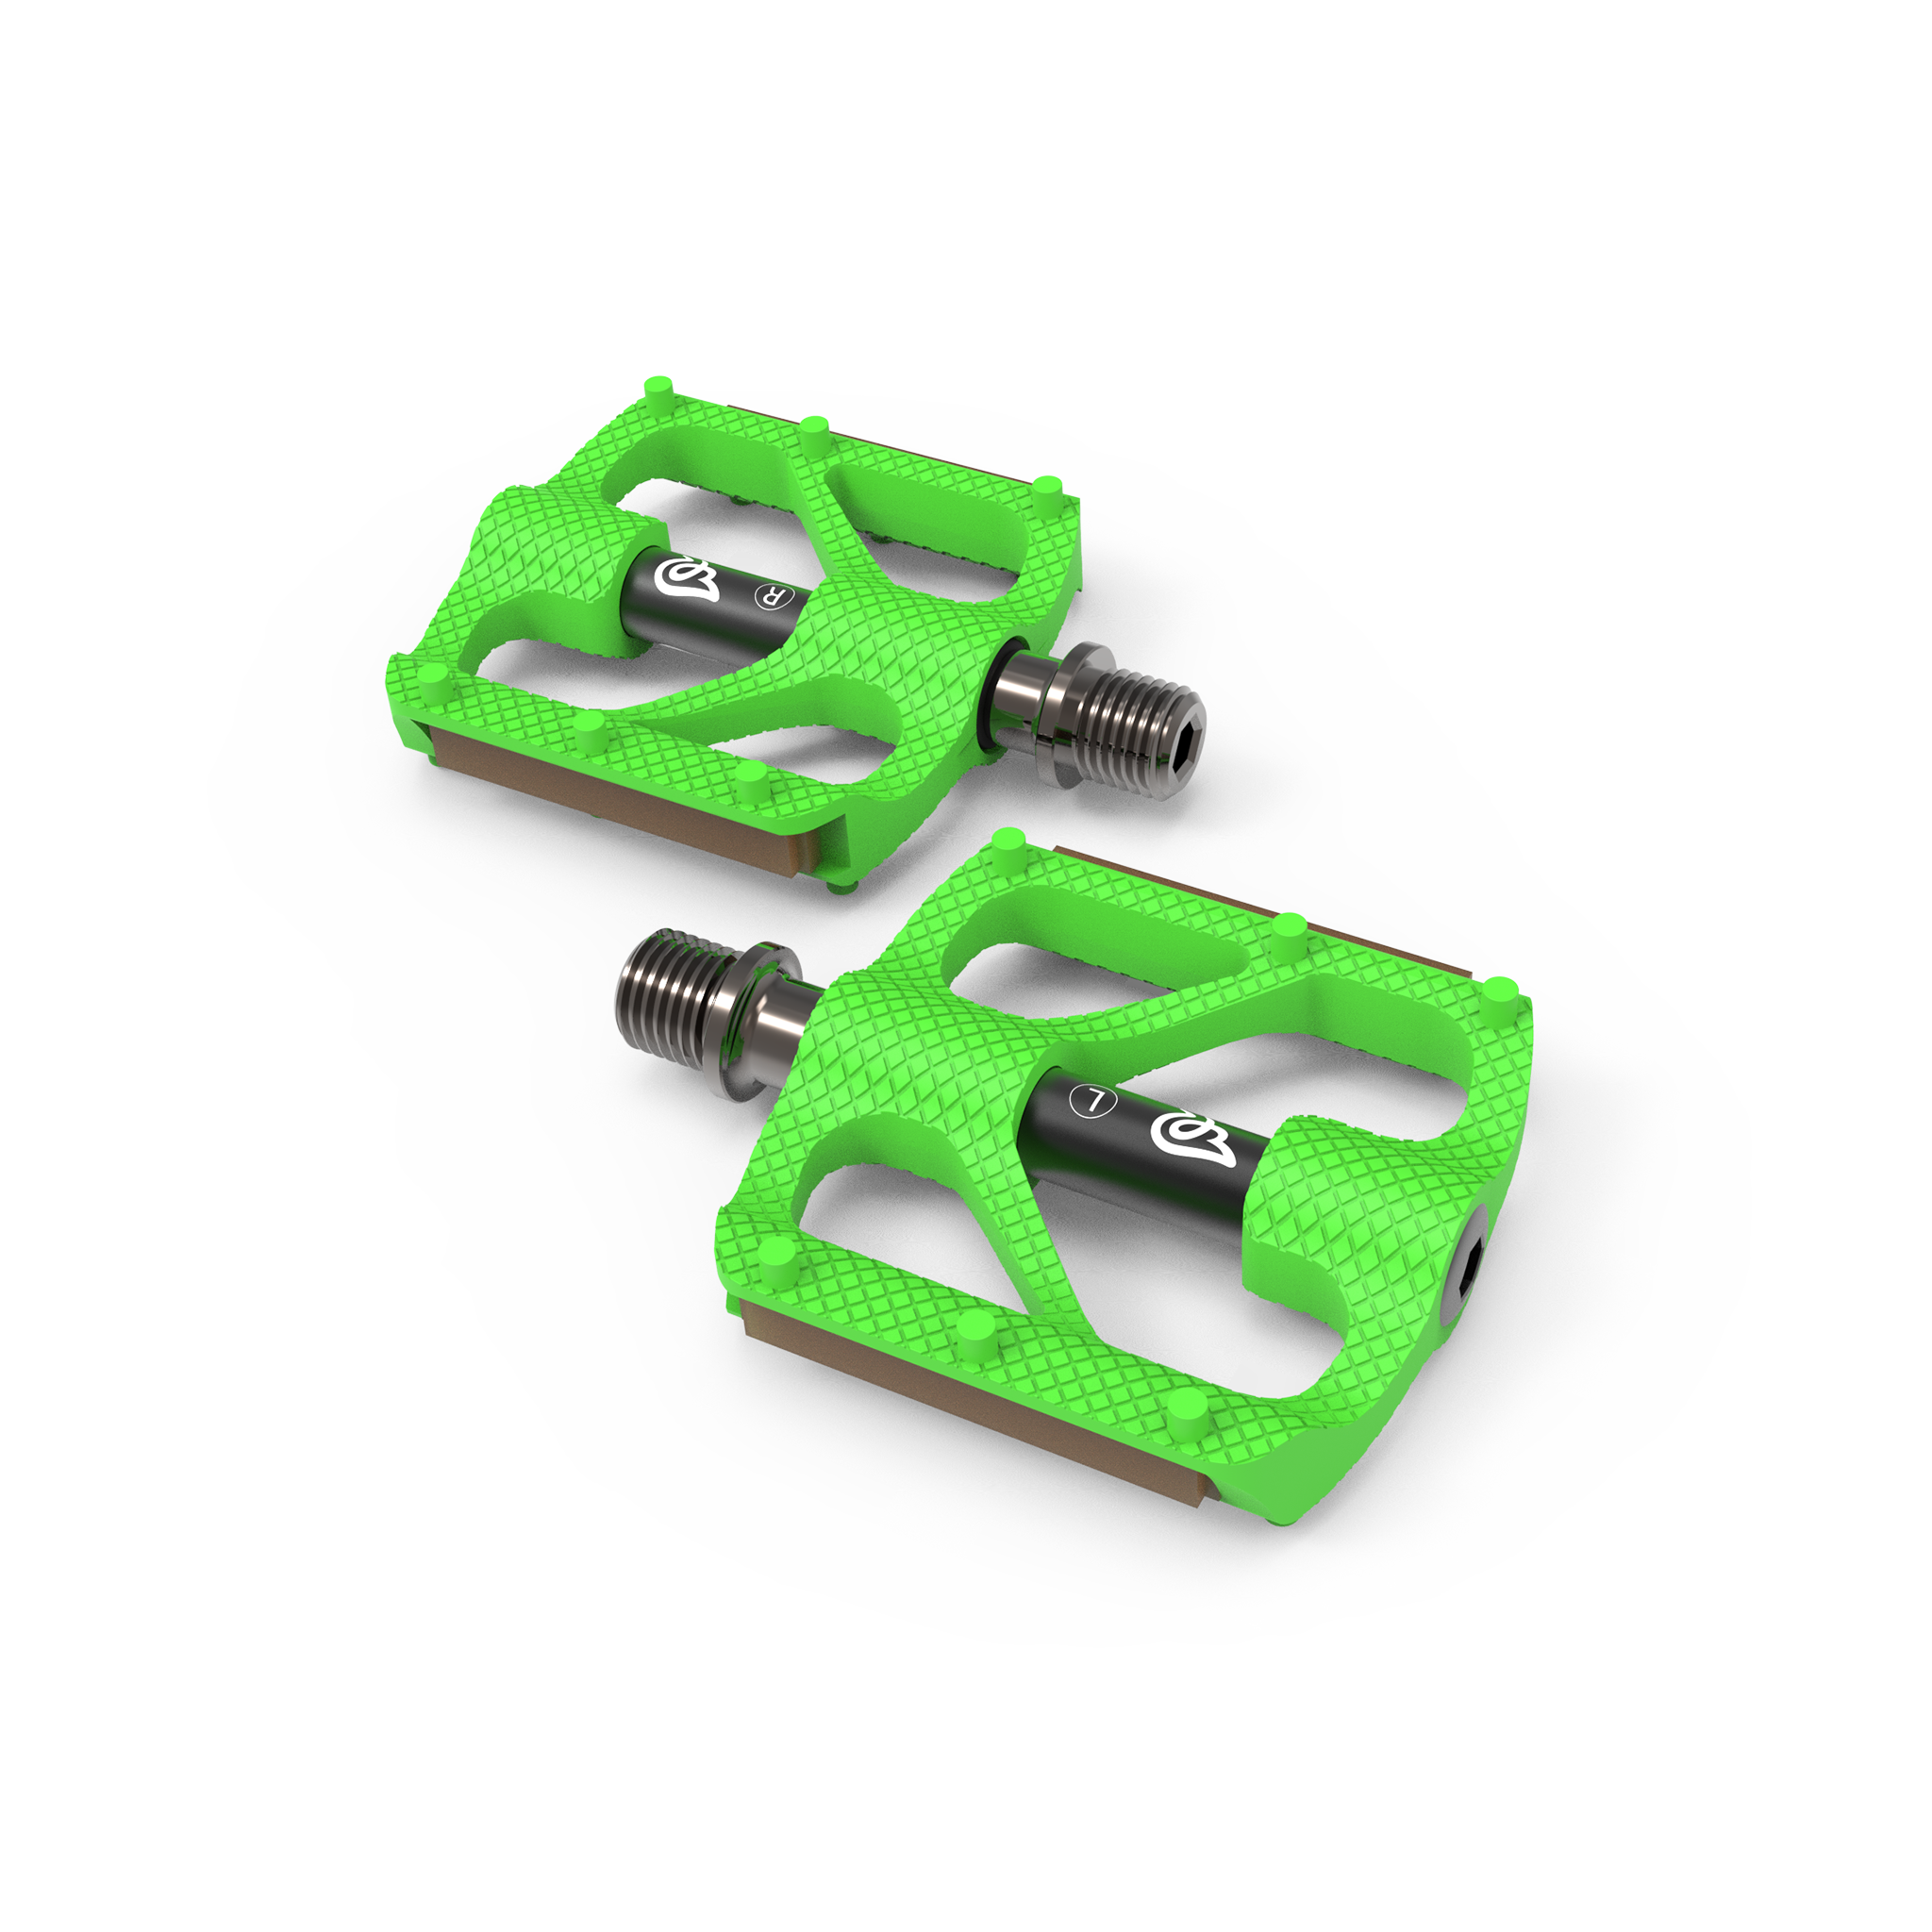 Early Rider P1 Resin Platform Pedals Green